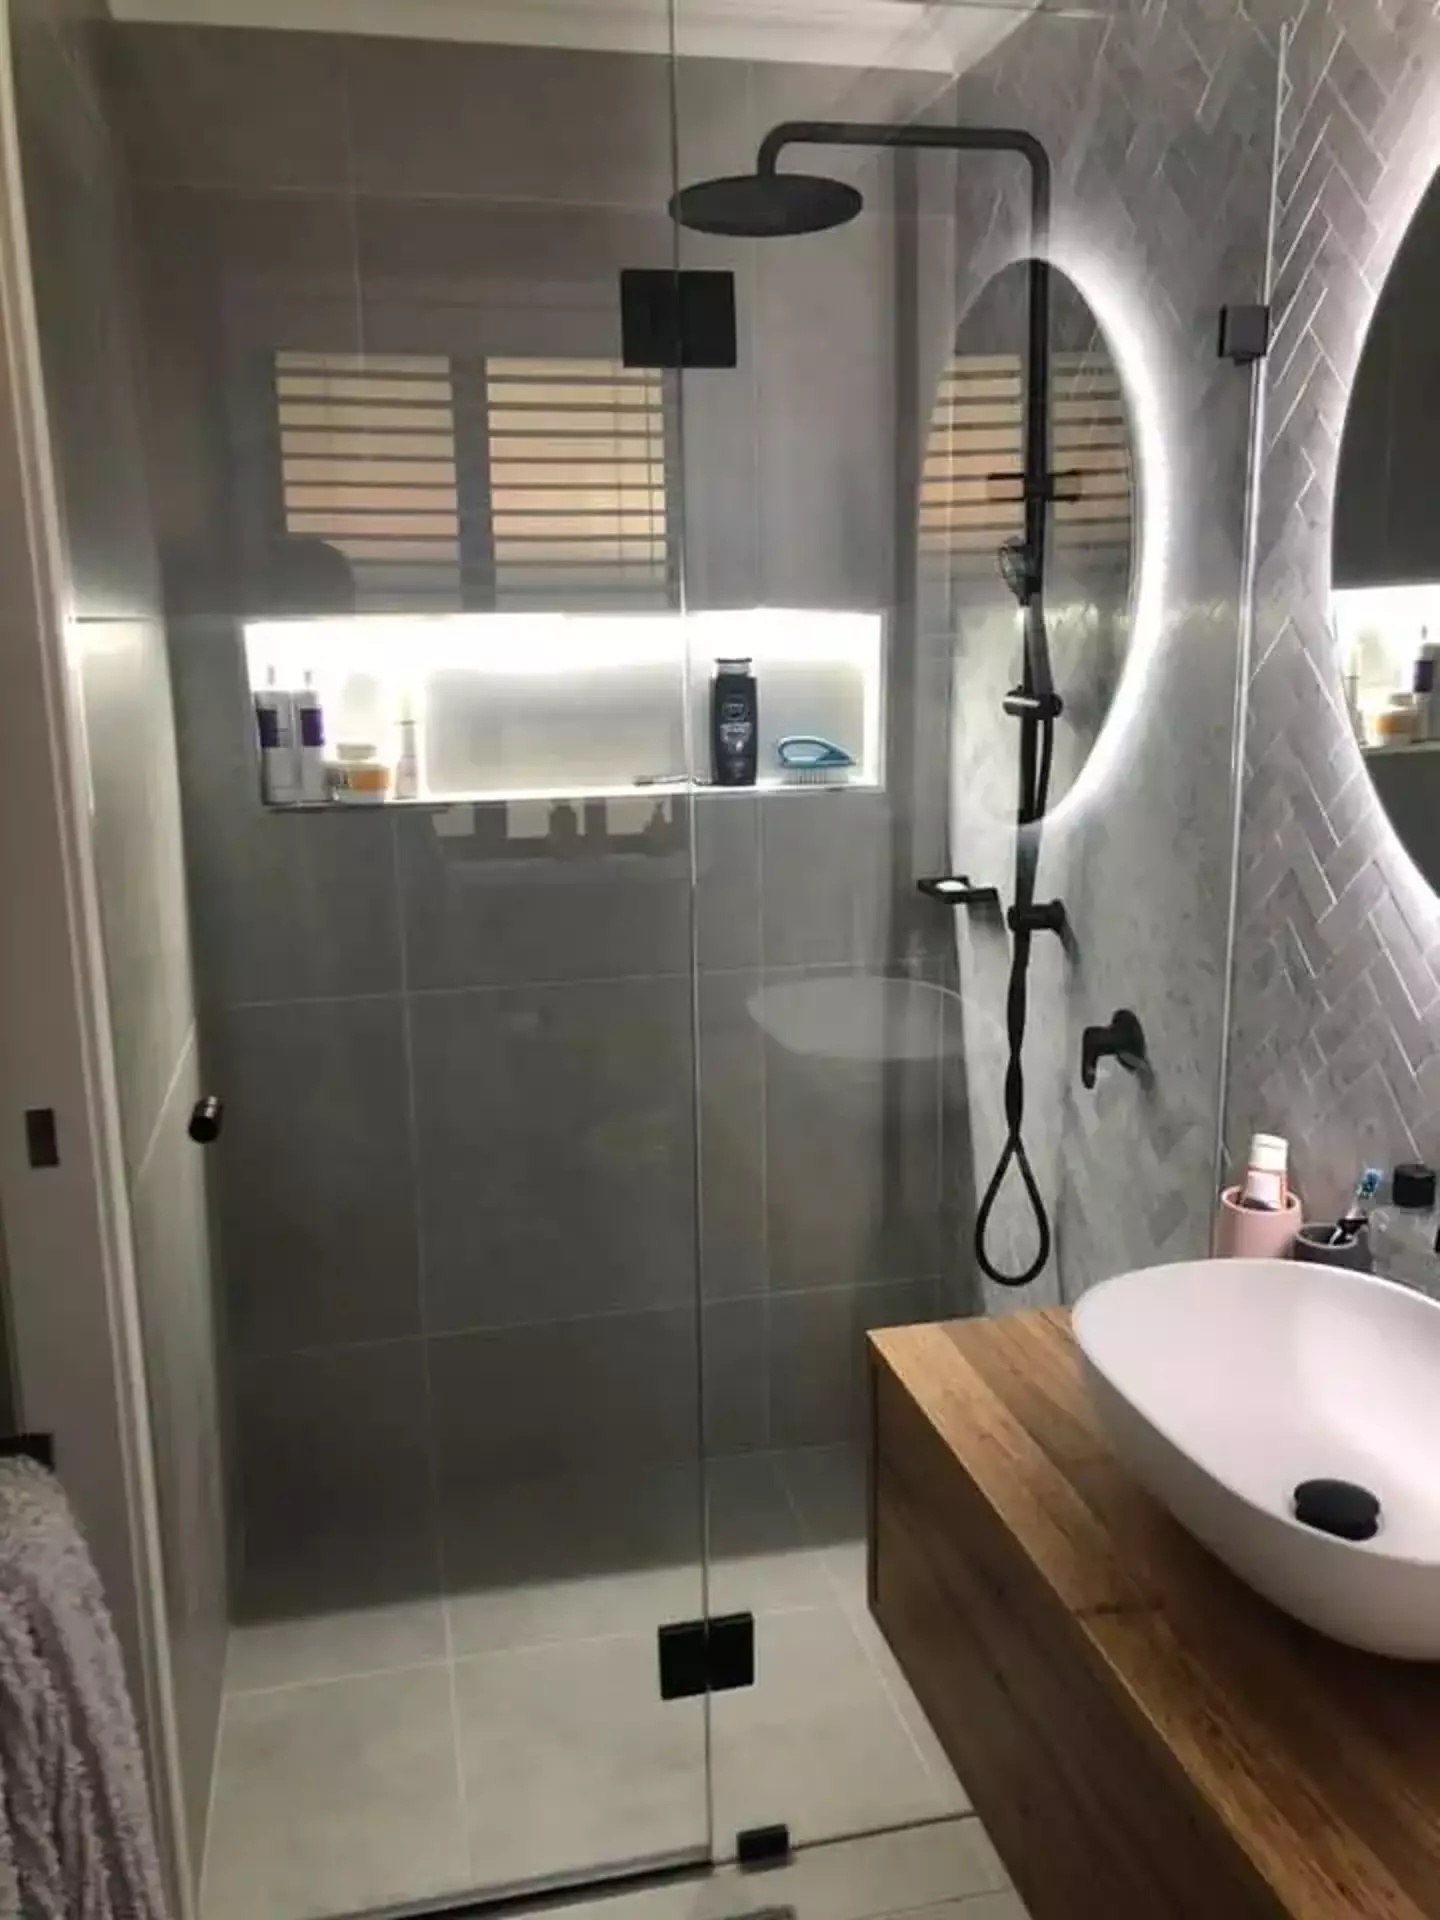 A spotless shower after using the hack.